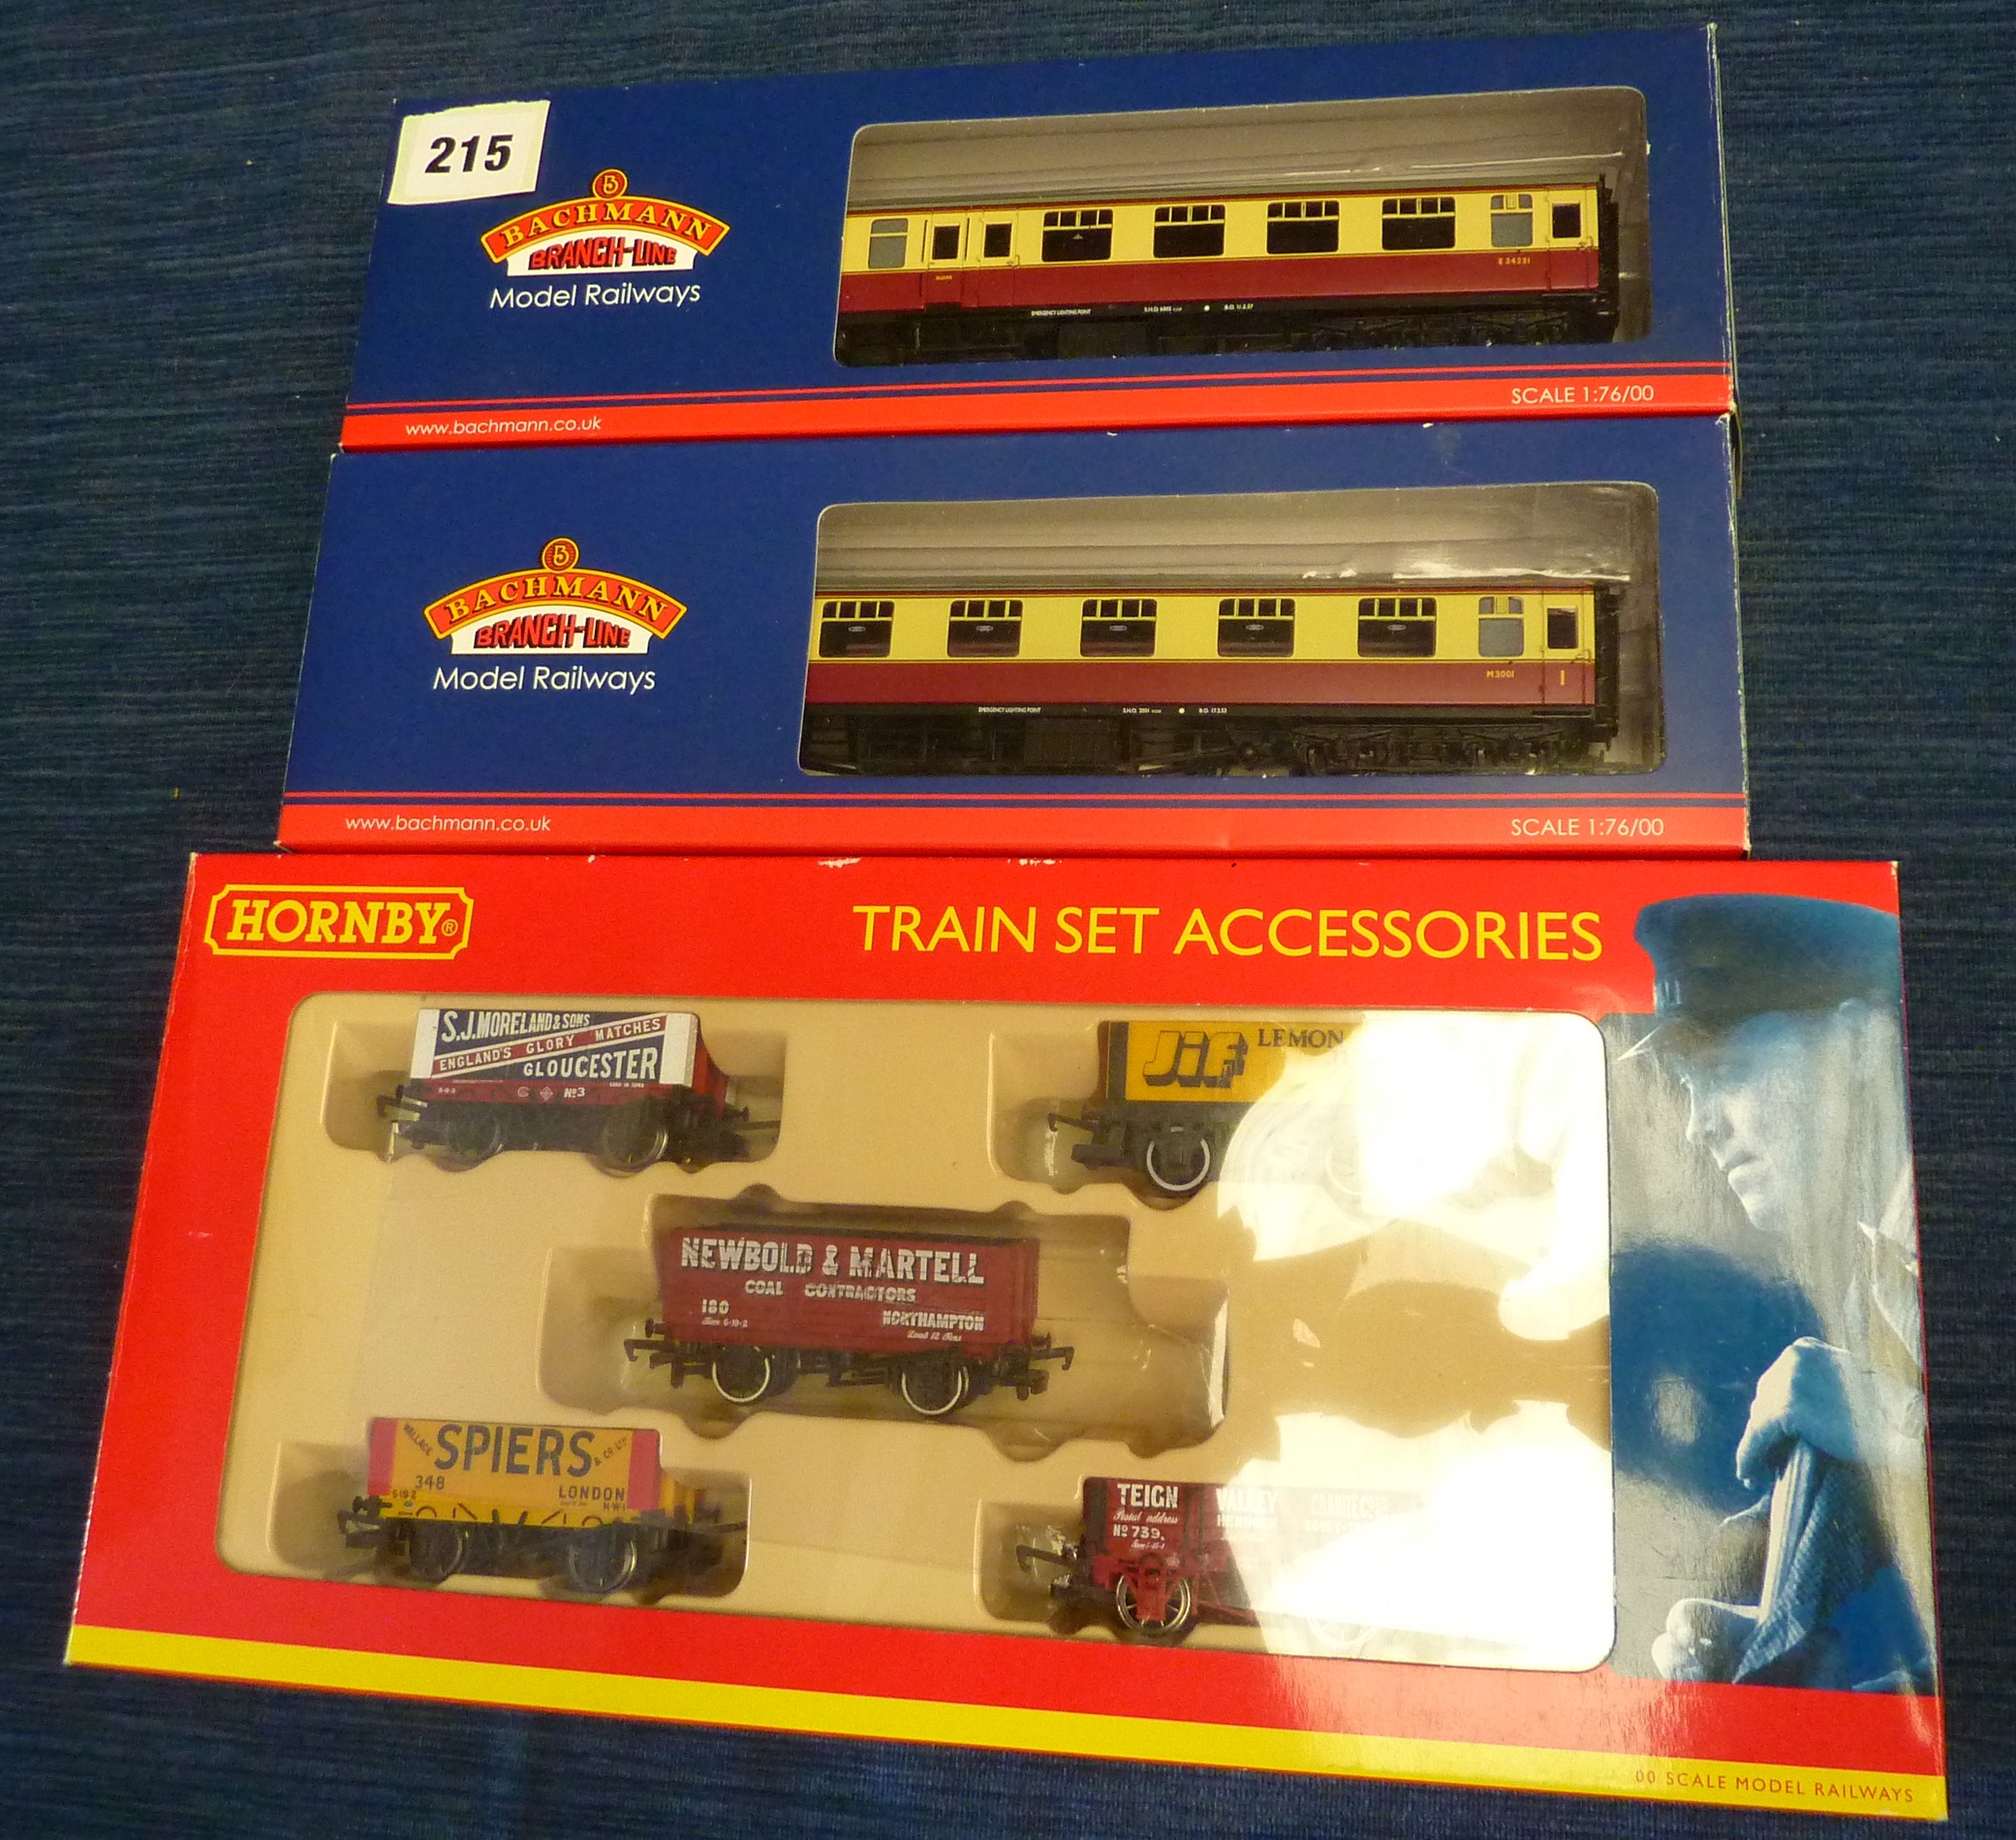 BACHMANN 2 BOXED COACHES 39-240 BE MK 1 FO IN CARMINE & CREAM AND 39-077F BSK SIMILAR LIVERY, T/W